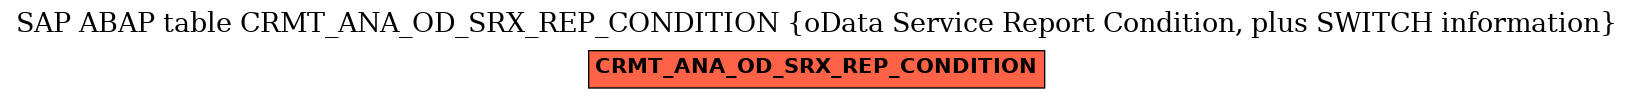 E-R Diagram for table CRMT_ANA_OD_SRX_REP_CONDITION (oData Service Report Condition, plus SWITCH information)